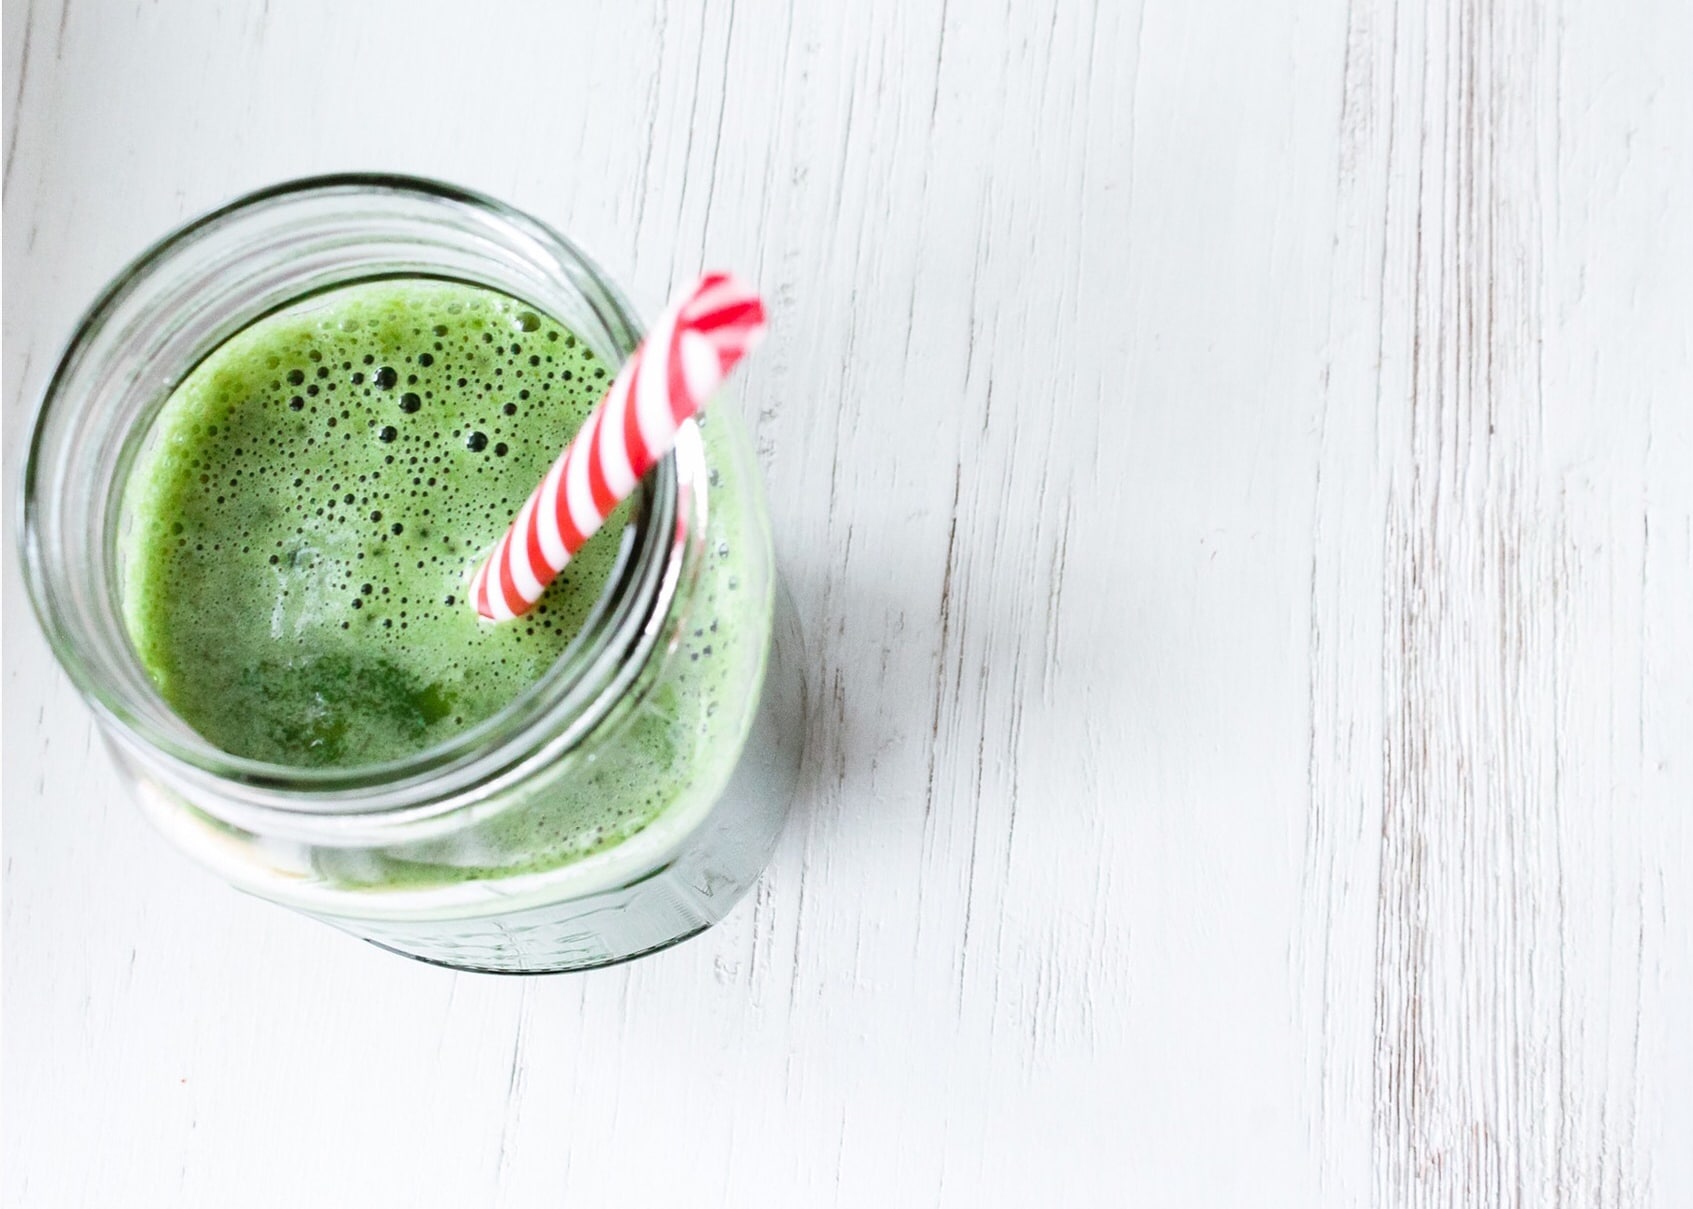 Green smoothie with red straw